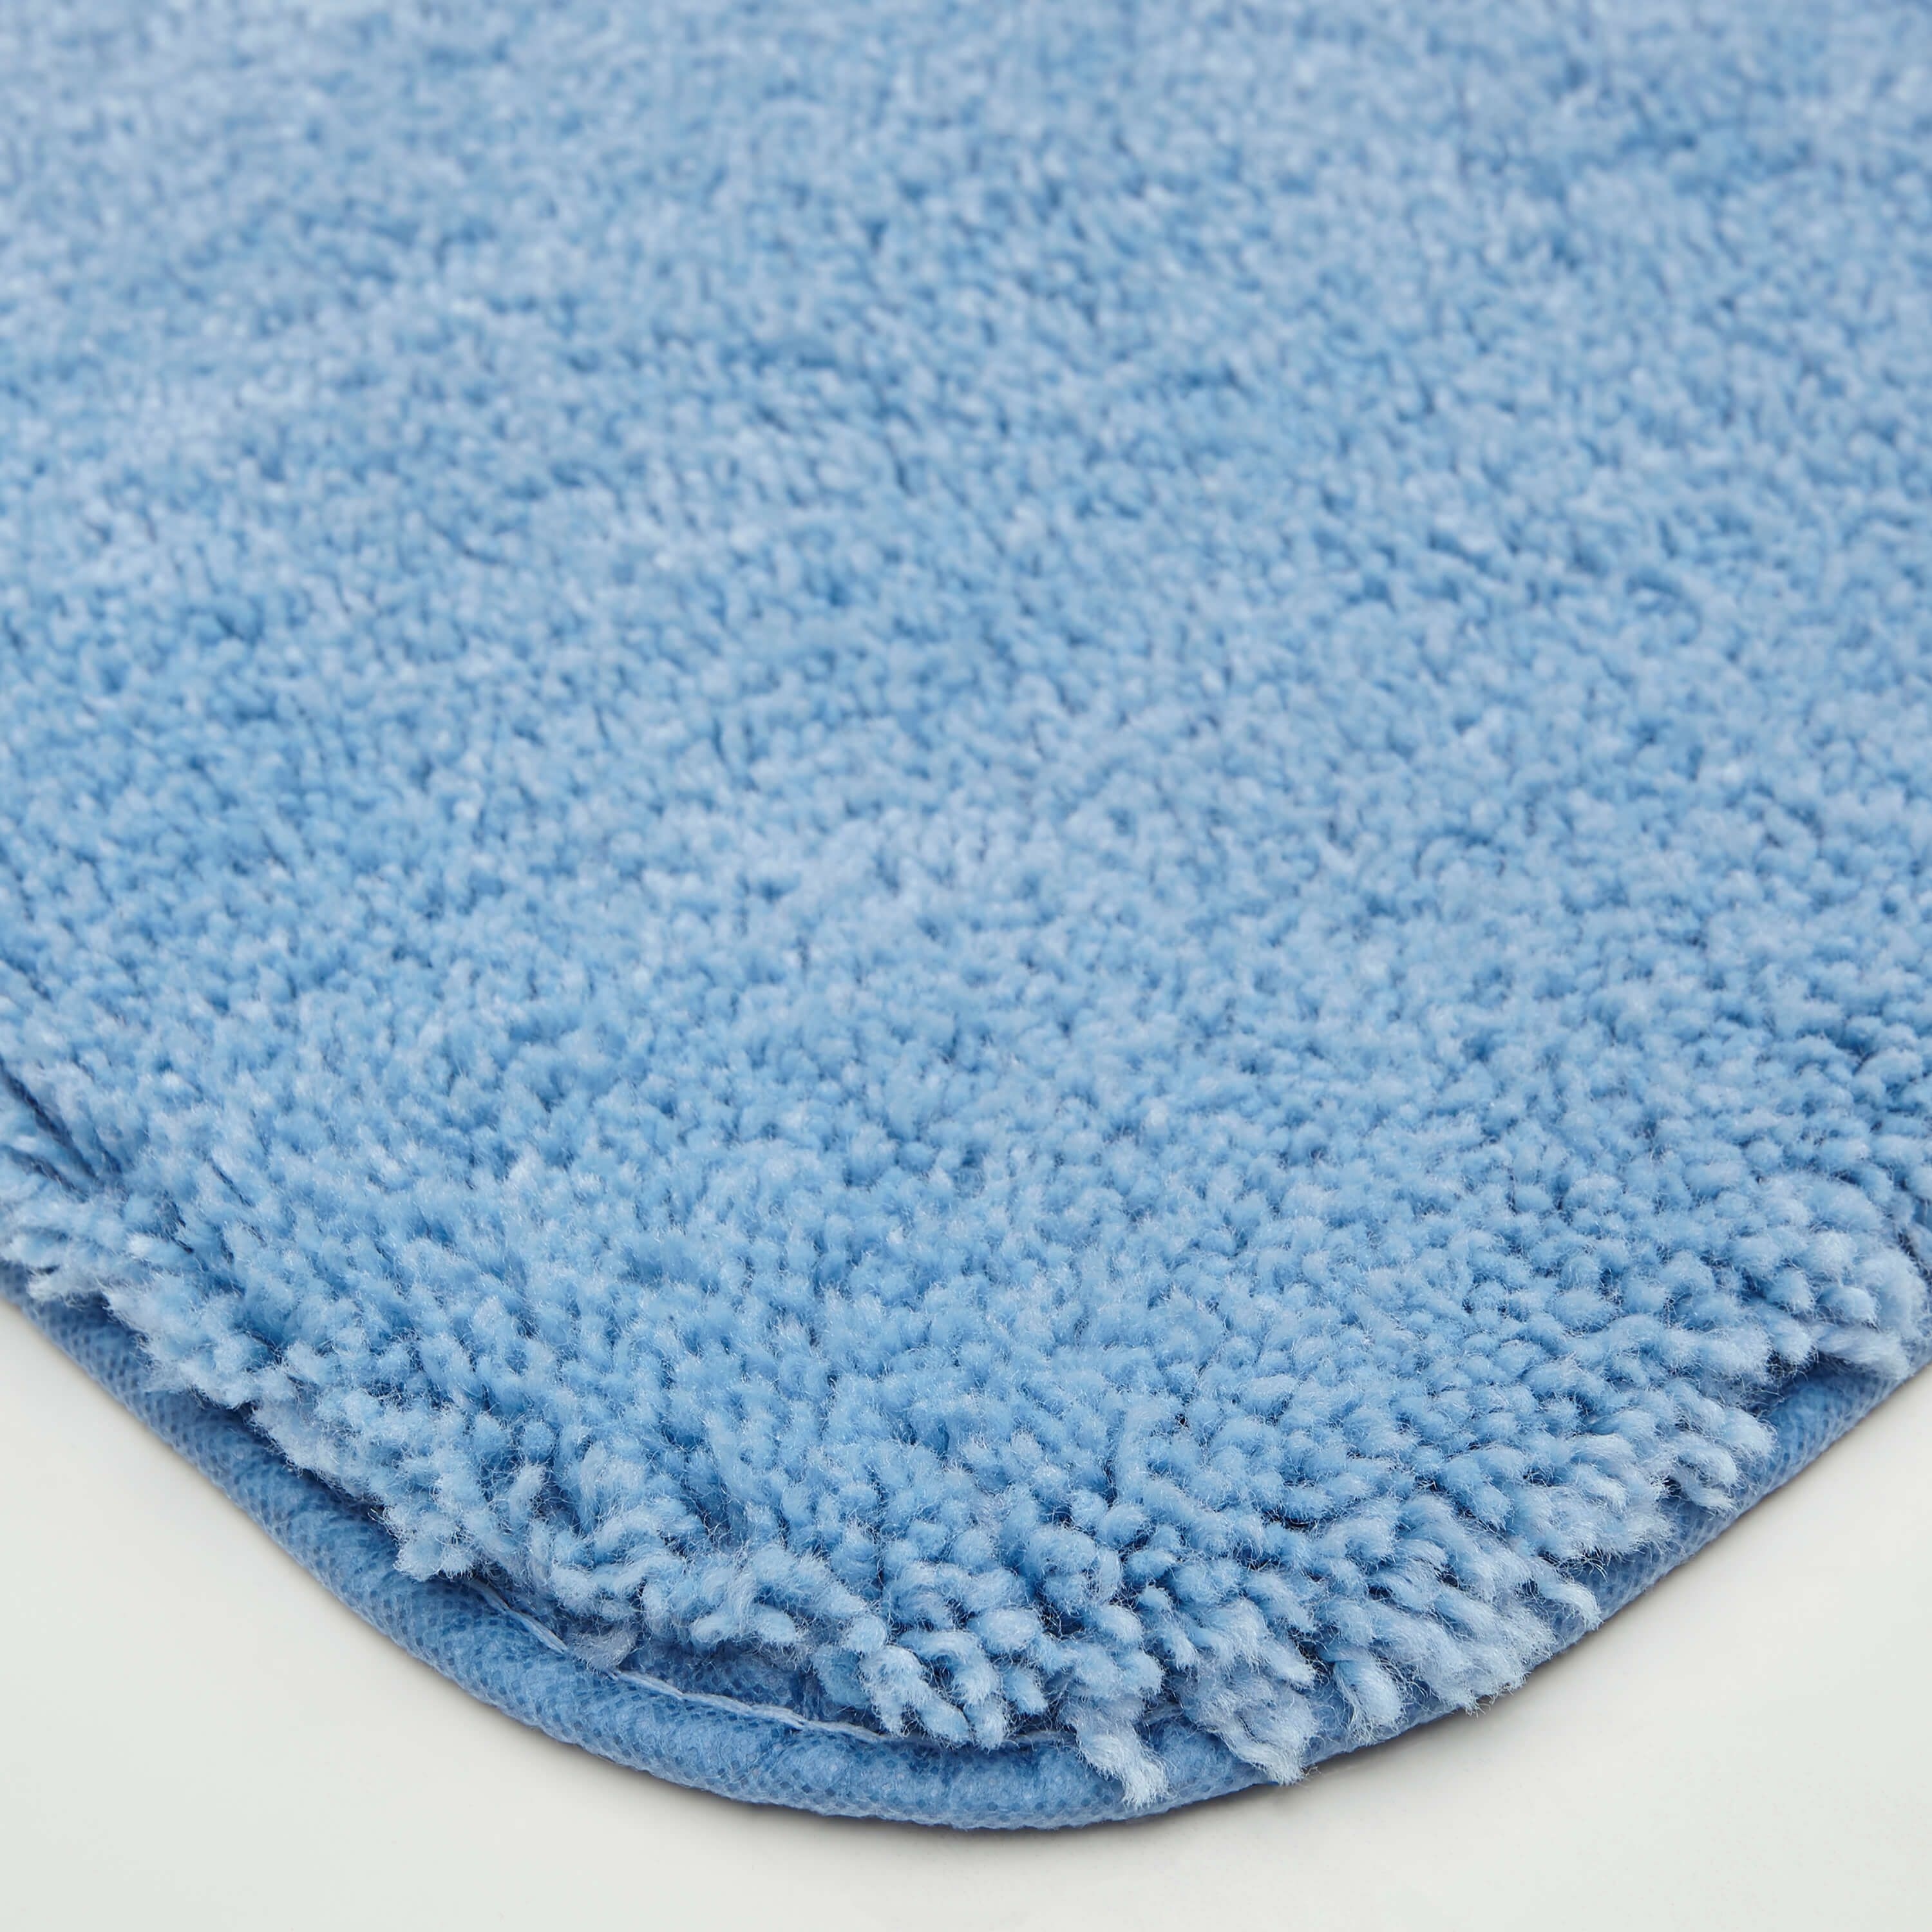 https://ak1.ostkcdn.com/images/products/is/images/direct/de404c348e87512837d93790ce44cc95159287ae/Mohawk-Home-Pure-Perfection-Solid-Patterned-Bath-Rug.jpg